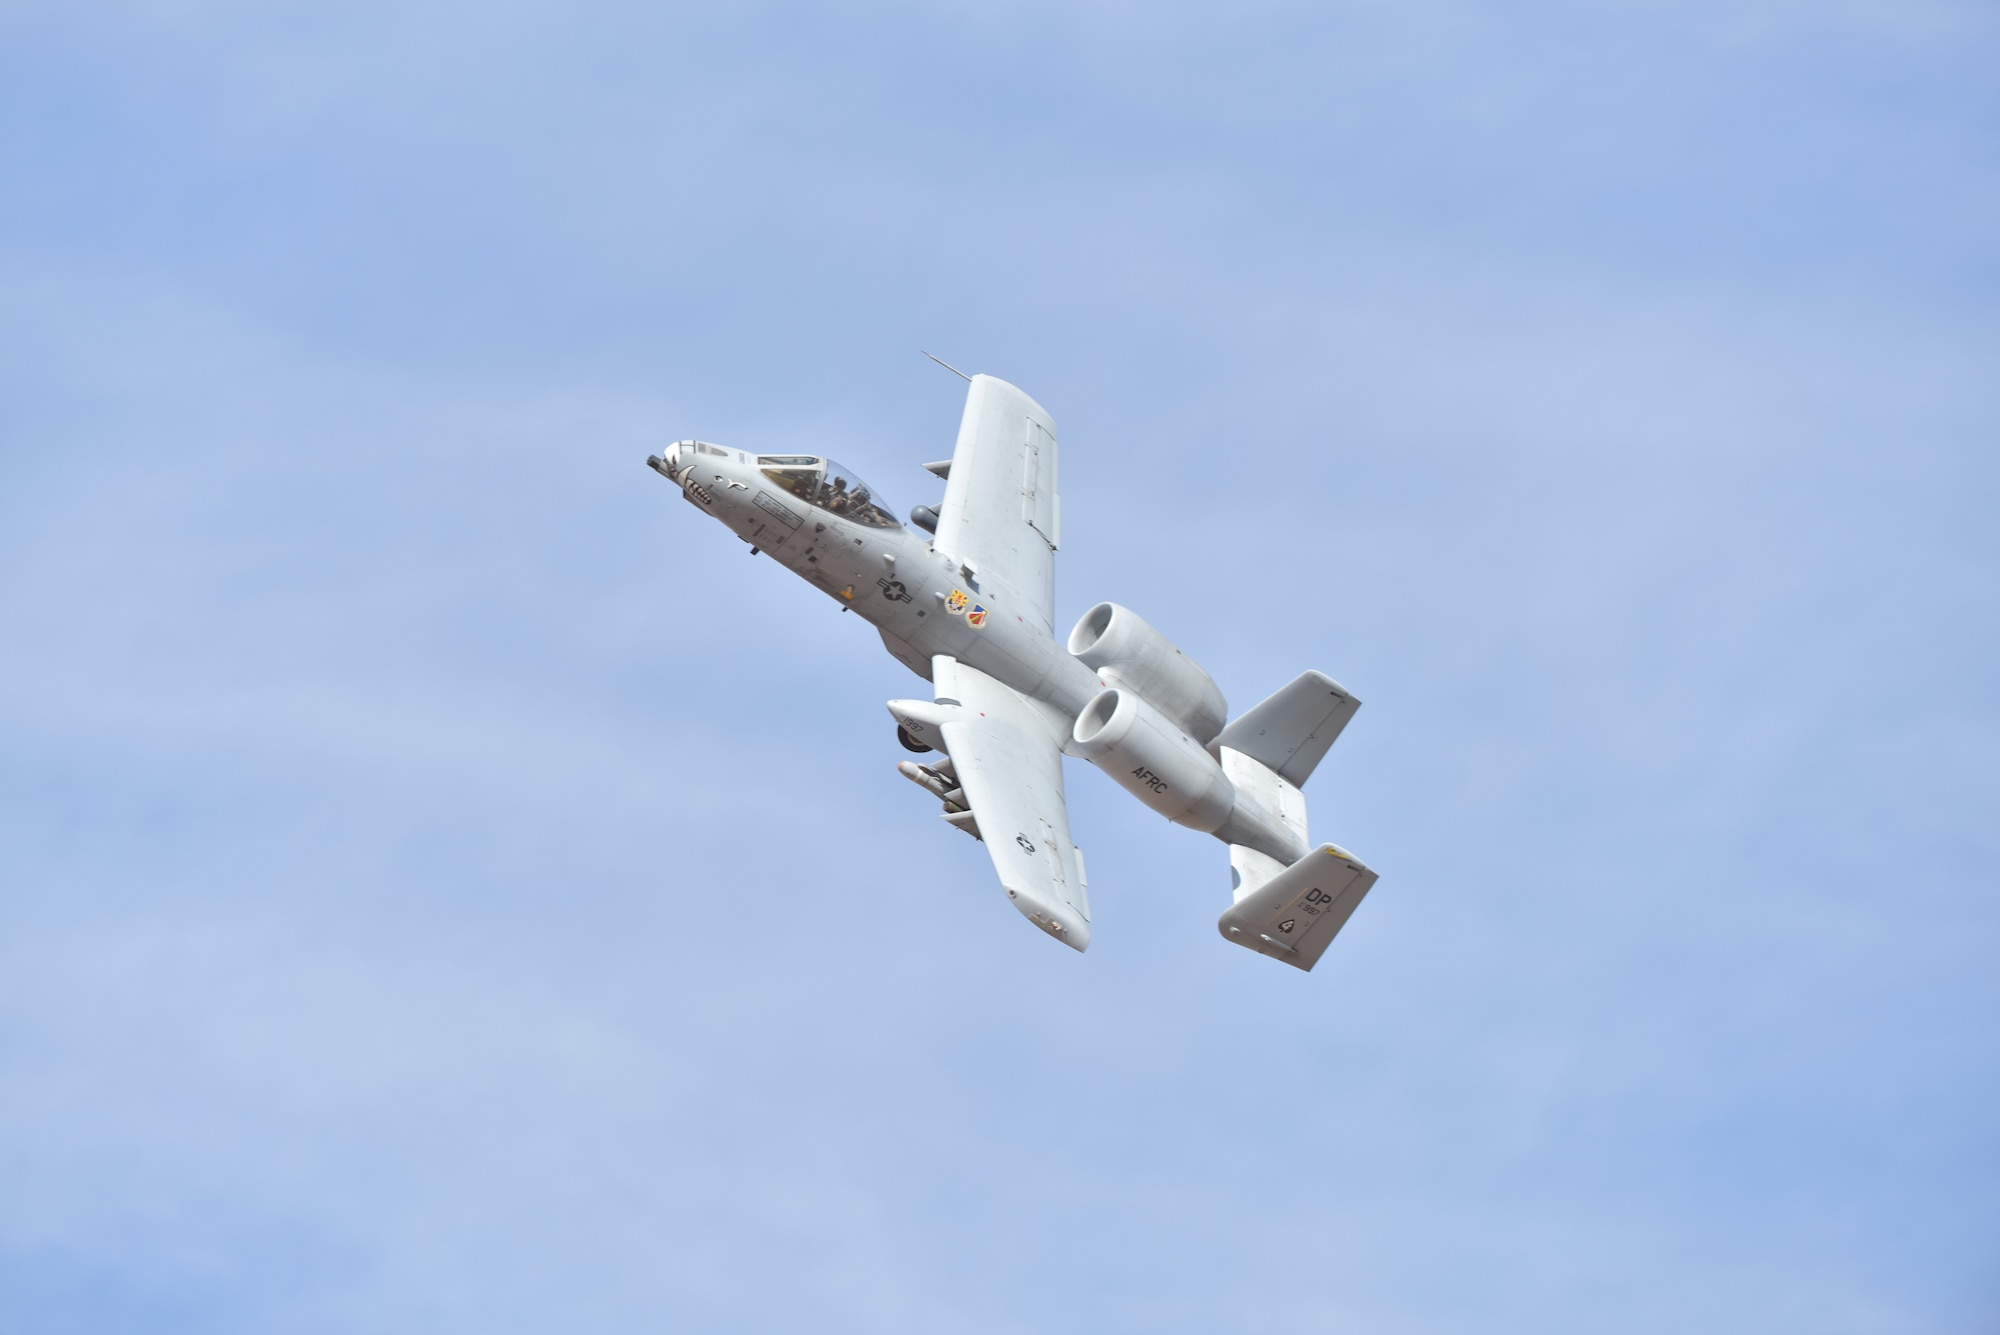 An A-10 “Warthog” from the 47th Fighter Squadron flies in Barry M. Goldwater Range airspace Nov. 21, 2019,during a civic leader tour at Barry M. Goldwater Range, Ariz.  The 47th Fighter Squadron was established on December 1, 1940 and now trains, educates, and mentors the world's finest attack pilots for the Combat Air Forces.